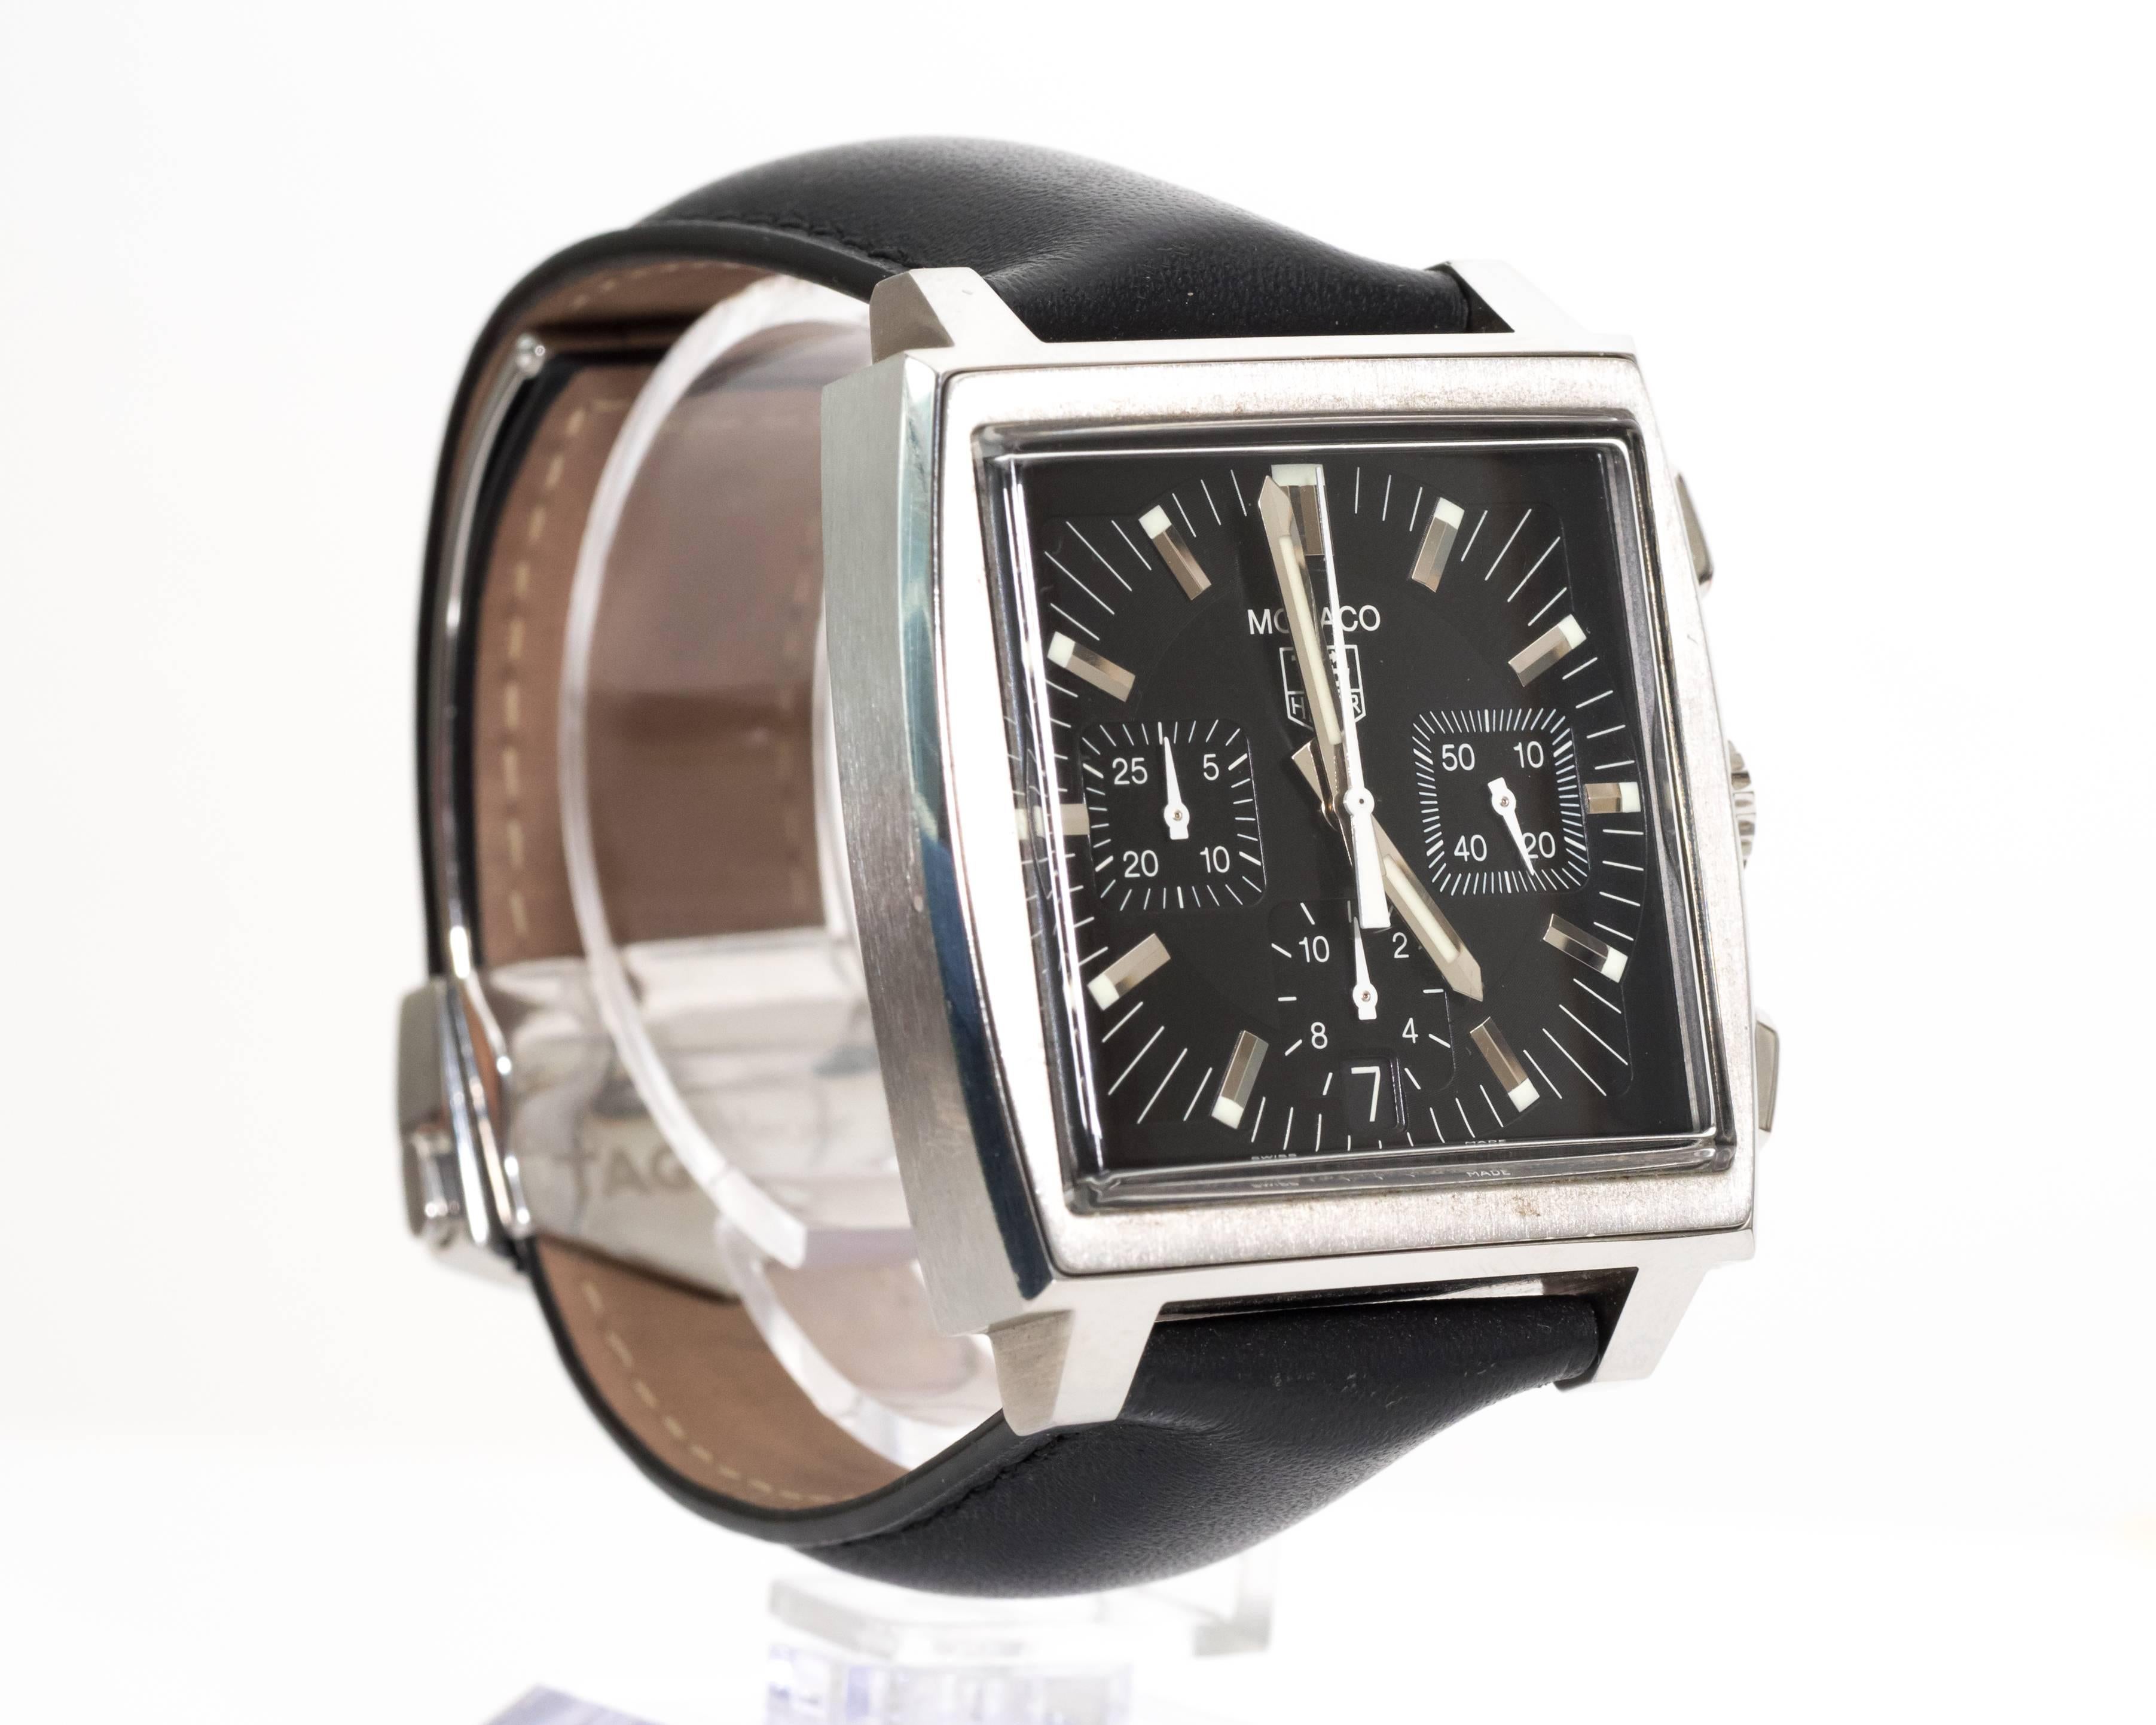 Late 2000s
Tag Heuer Monaco Wristwatch
Chronograph Automatic
Stainless Steel
Black Dial
Leather strap, Like New Condition. Features Deployment Clasp
Automatic Chronograph
#CW2111-0
Water Resistant, 30M

Hallmarked MONACO and Swissmade on Case Back 